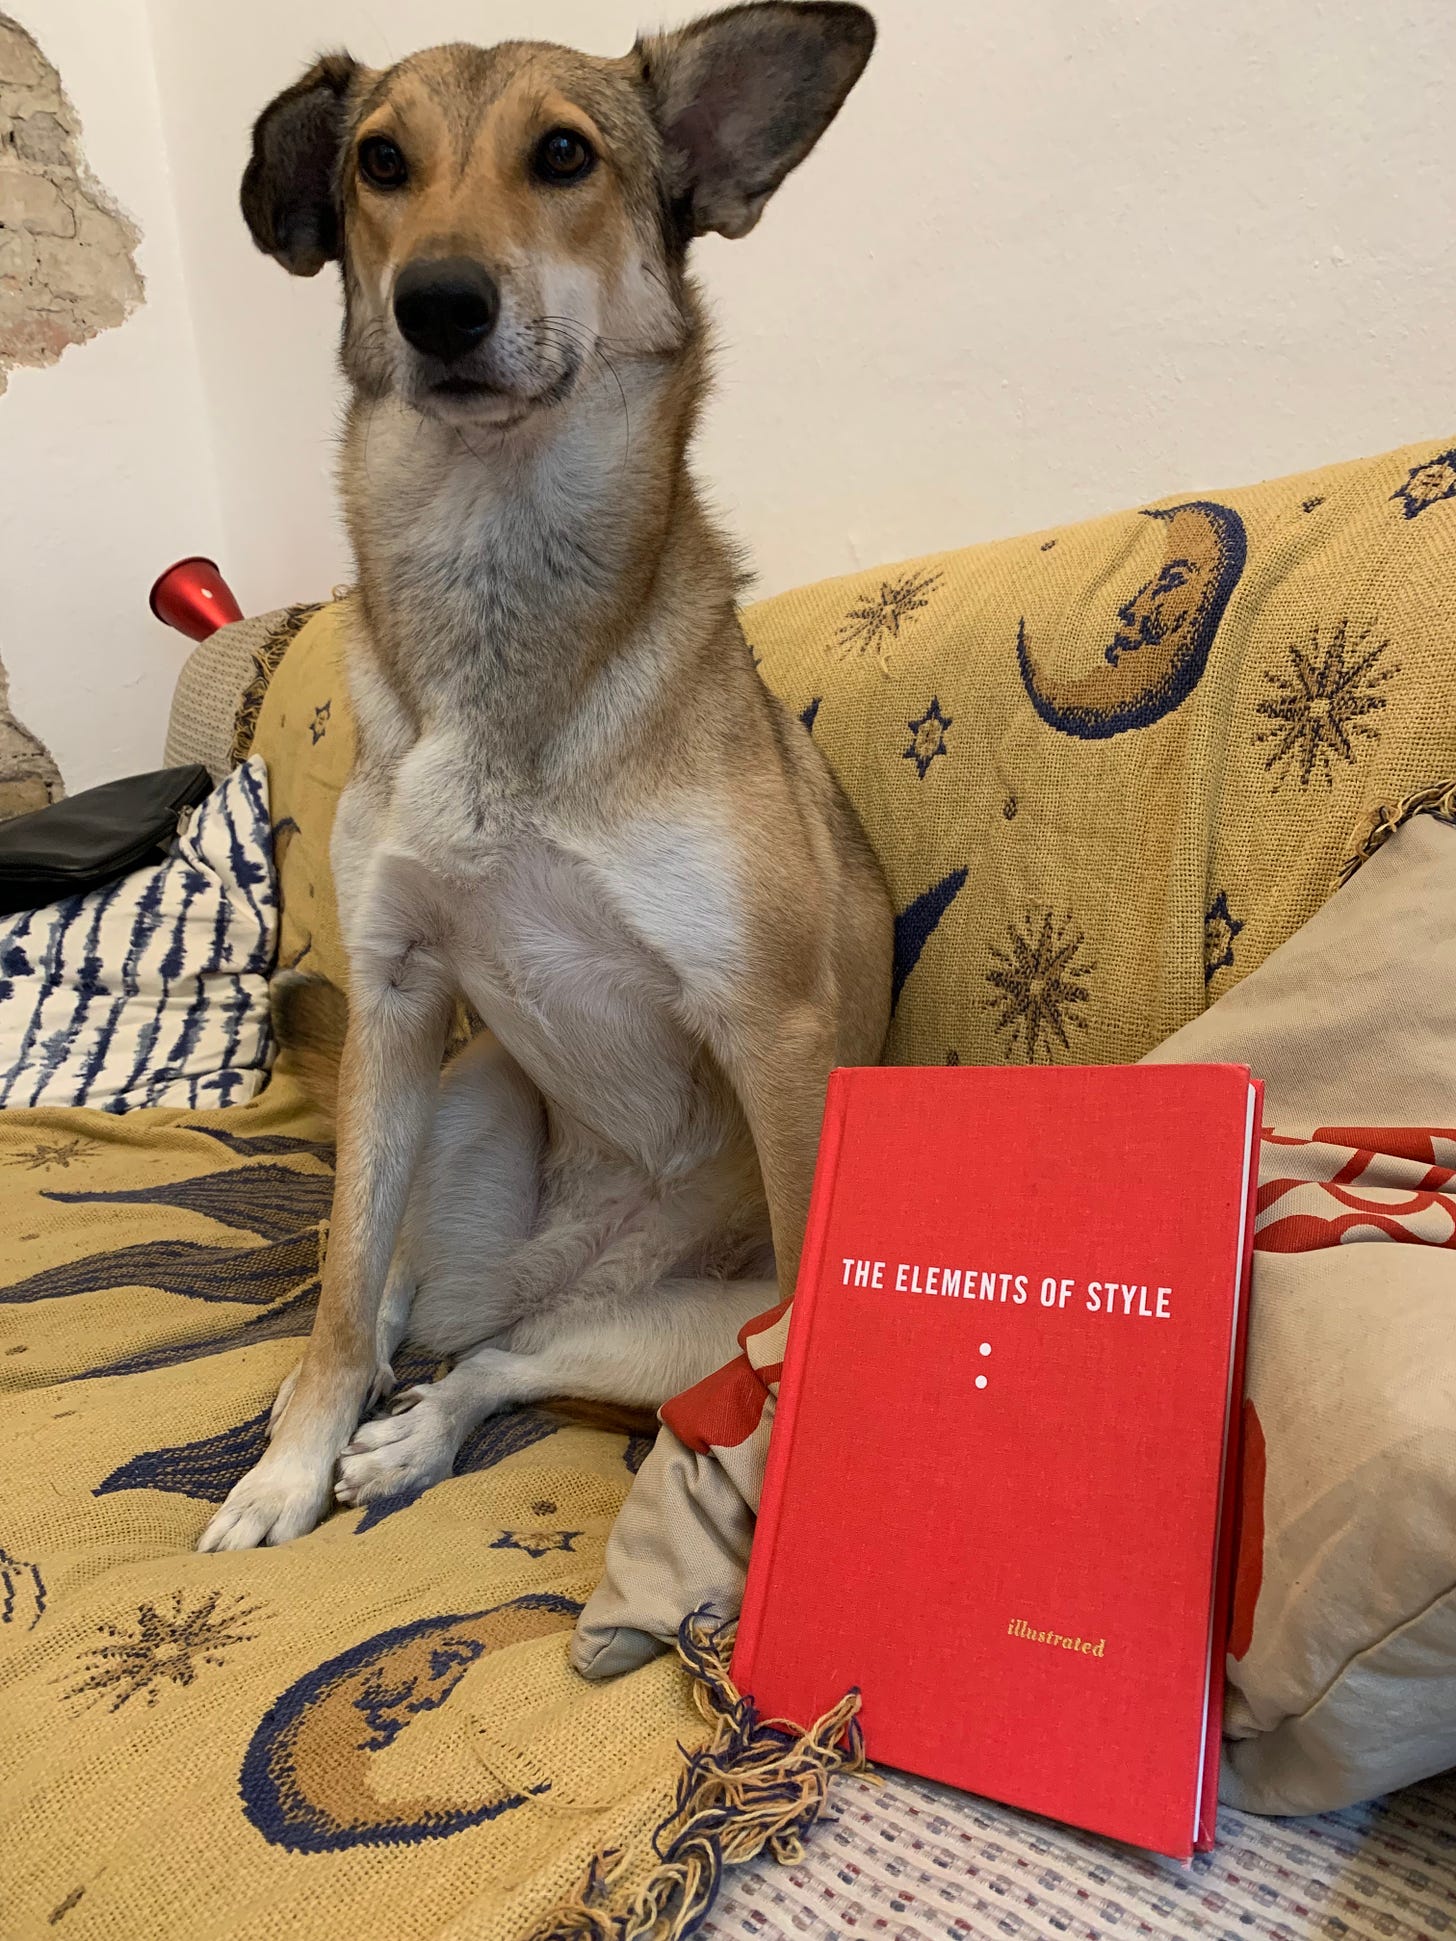 The dog Hester sits on a couch next to a red copy of the Elements of Style.